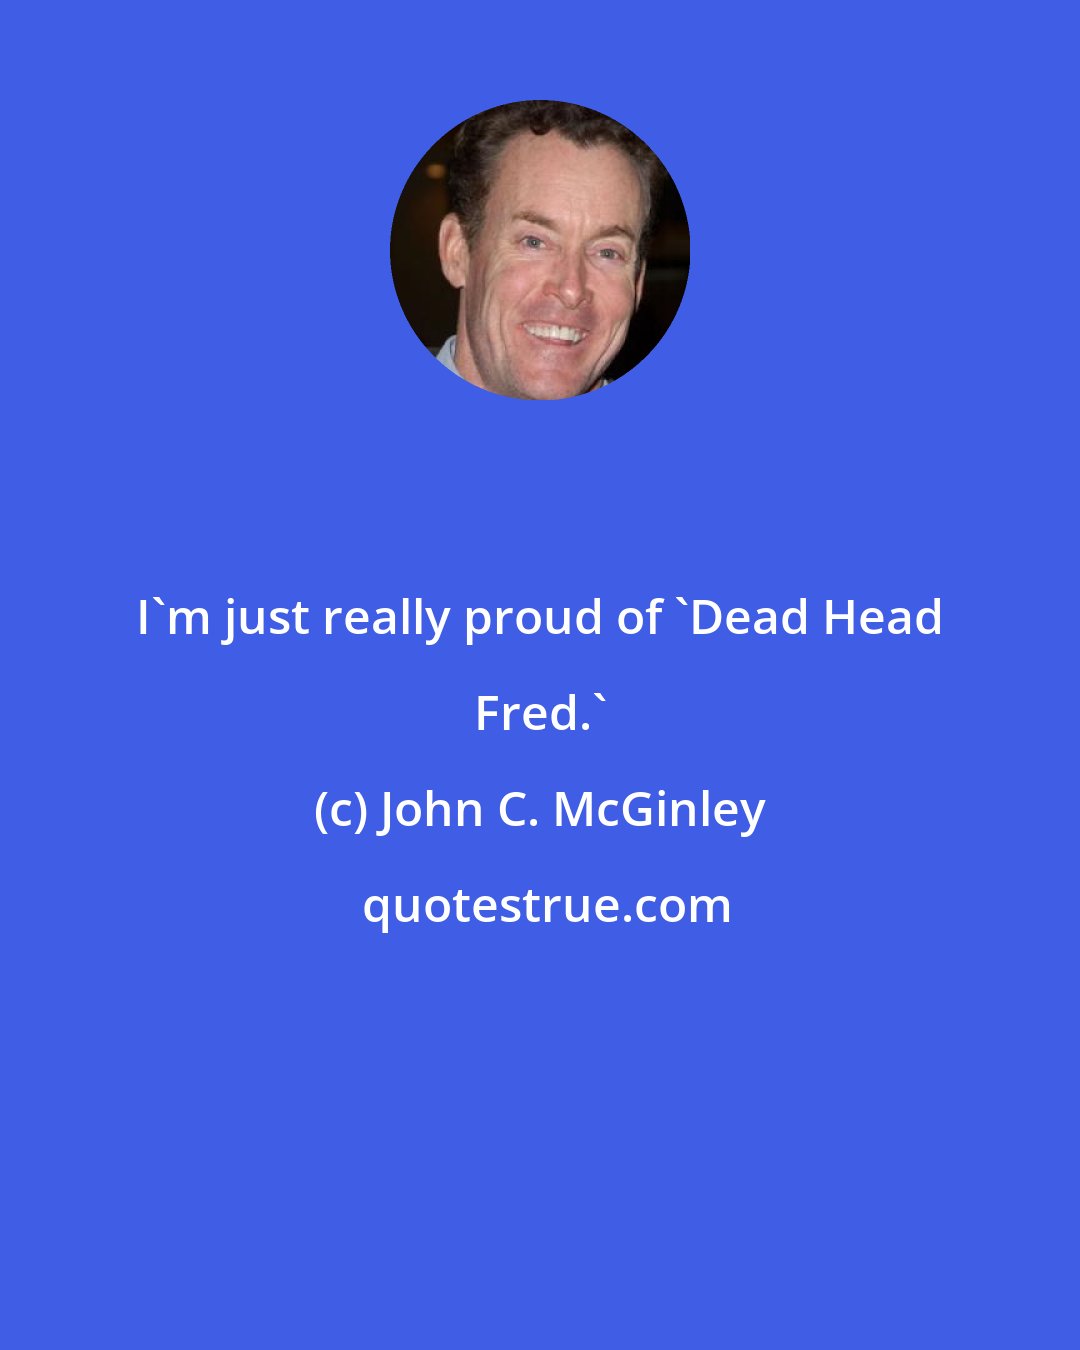 John C. McGinley: I'm just really proud of 'Dead Head Fred.'